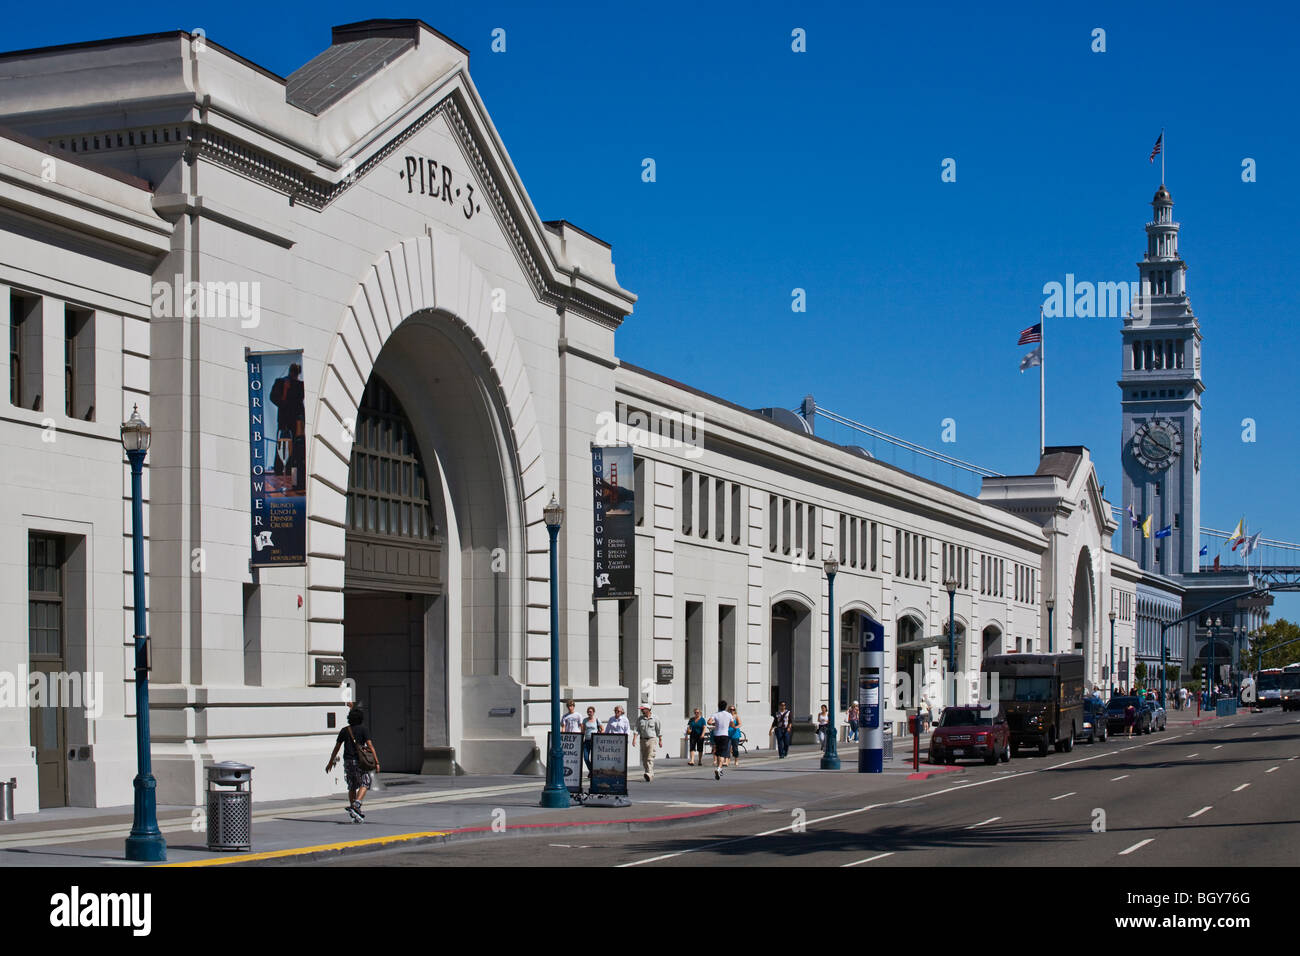 The FERRY BUILDING MARKETPLACE and PIER 3 at THE EMBARCADERO - SAN FRANCISCO, CALIFORNIA Stock Photo